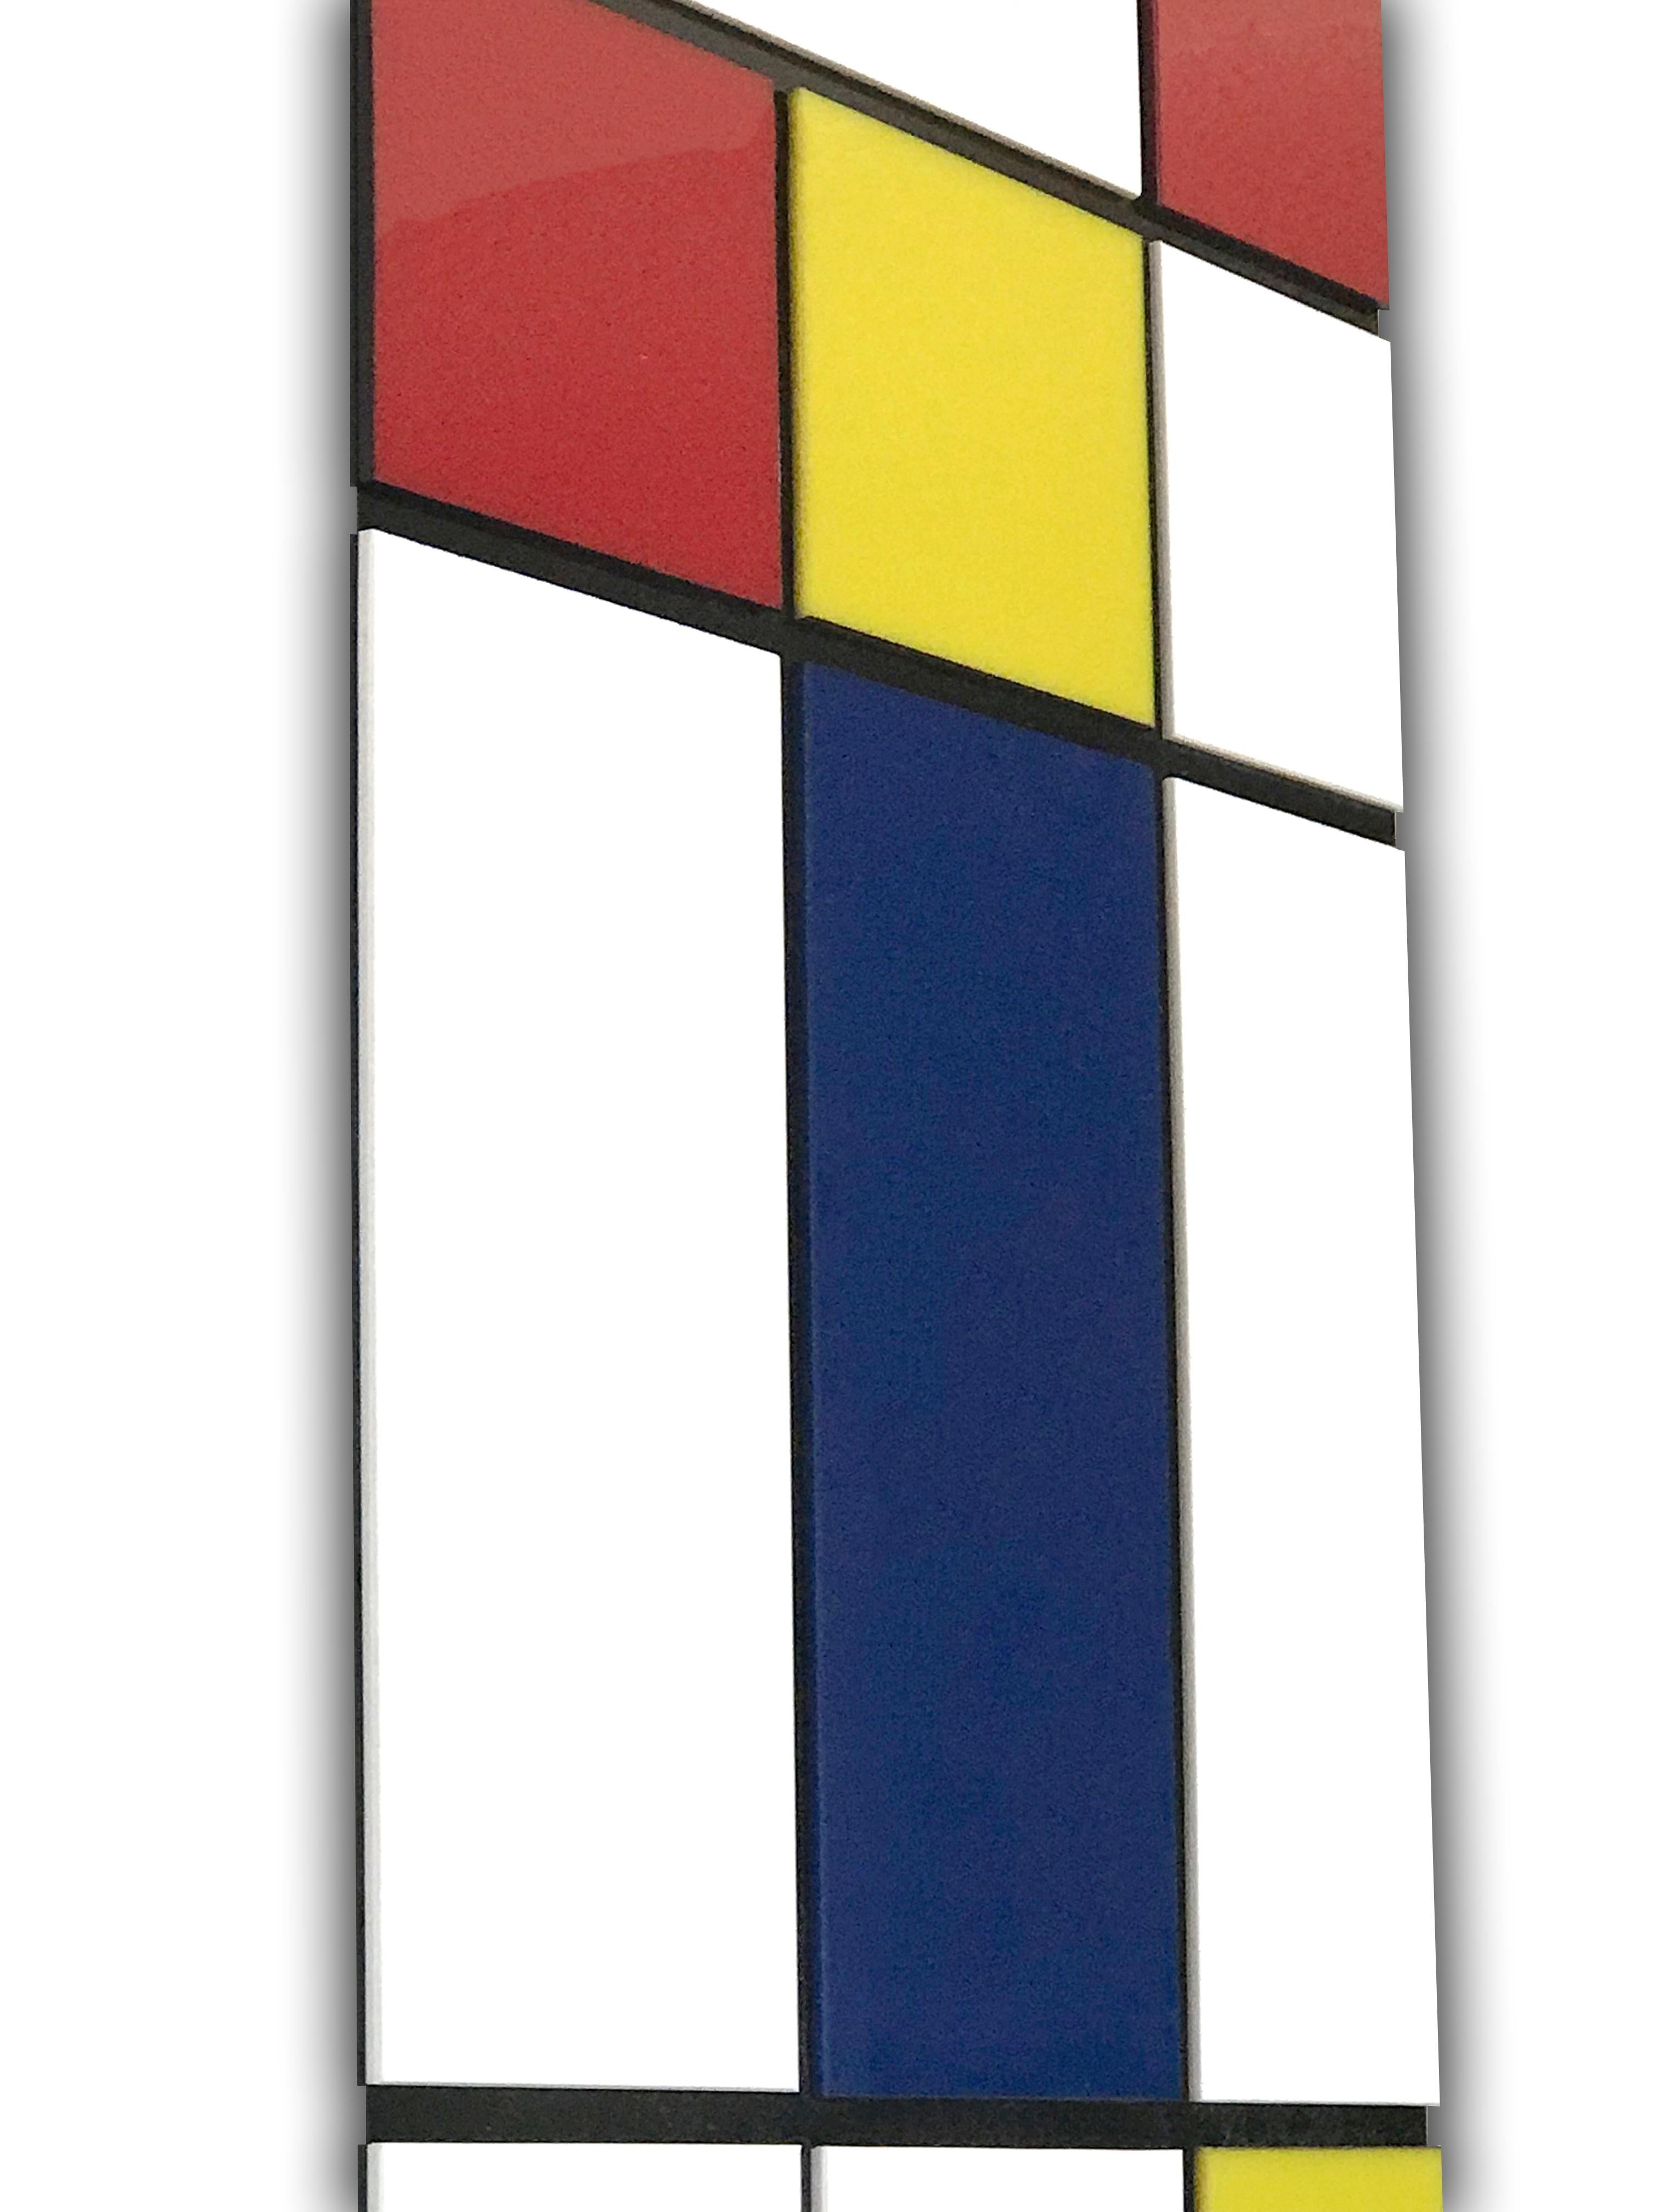 Piet Mondrian was and still is a pioneer in abstract art. This 3D wall sculpture is an homage to his contributions. Though his body of work spans several styles, his compositions using primary colors and simple lines are what brought him renowned